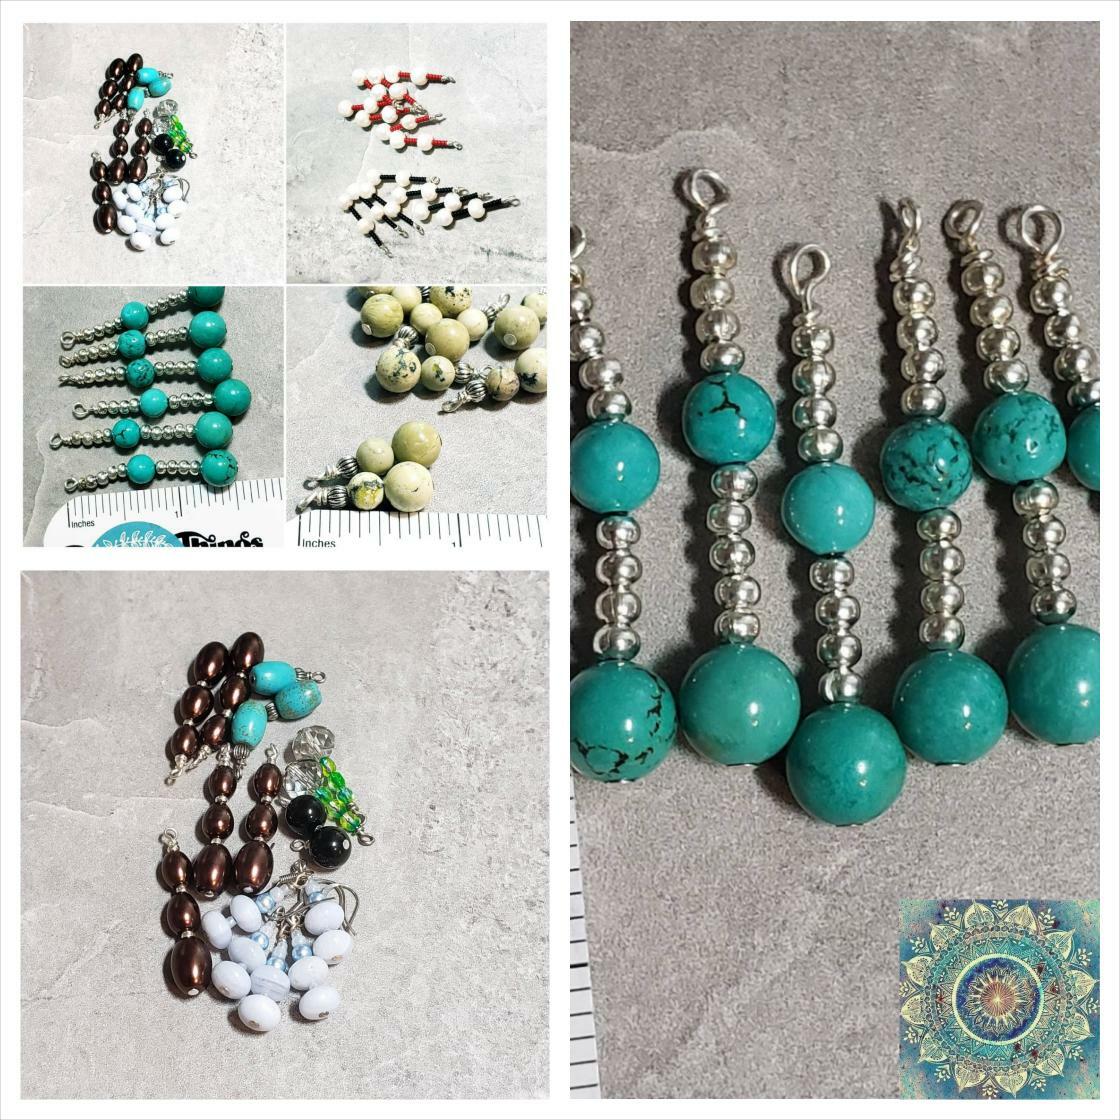 Unmissable! Check out this Bead destash, random selection of assembled Bead Drops. Glass Beads, freshwater pearl beads, glass pearls, turquoise, gemstone destash only at $11.00. 
etsy.com/listing/130819…
#PreMadeDiy #DestashPreMade